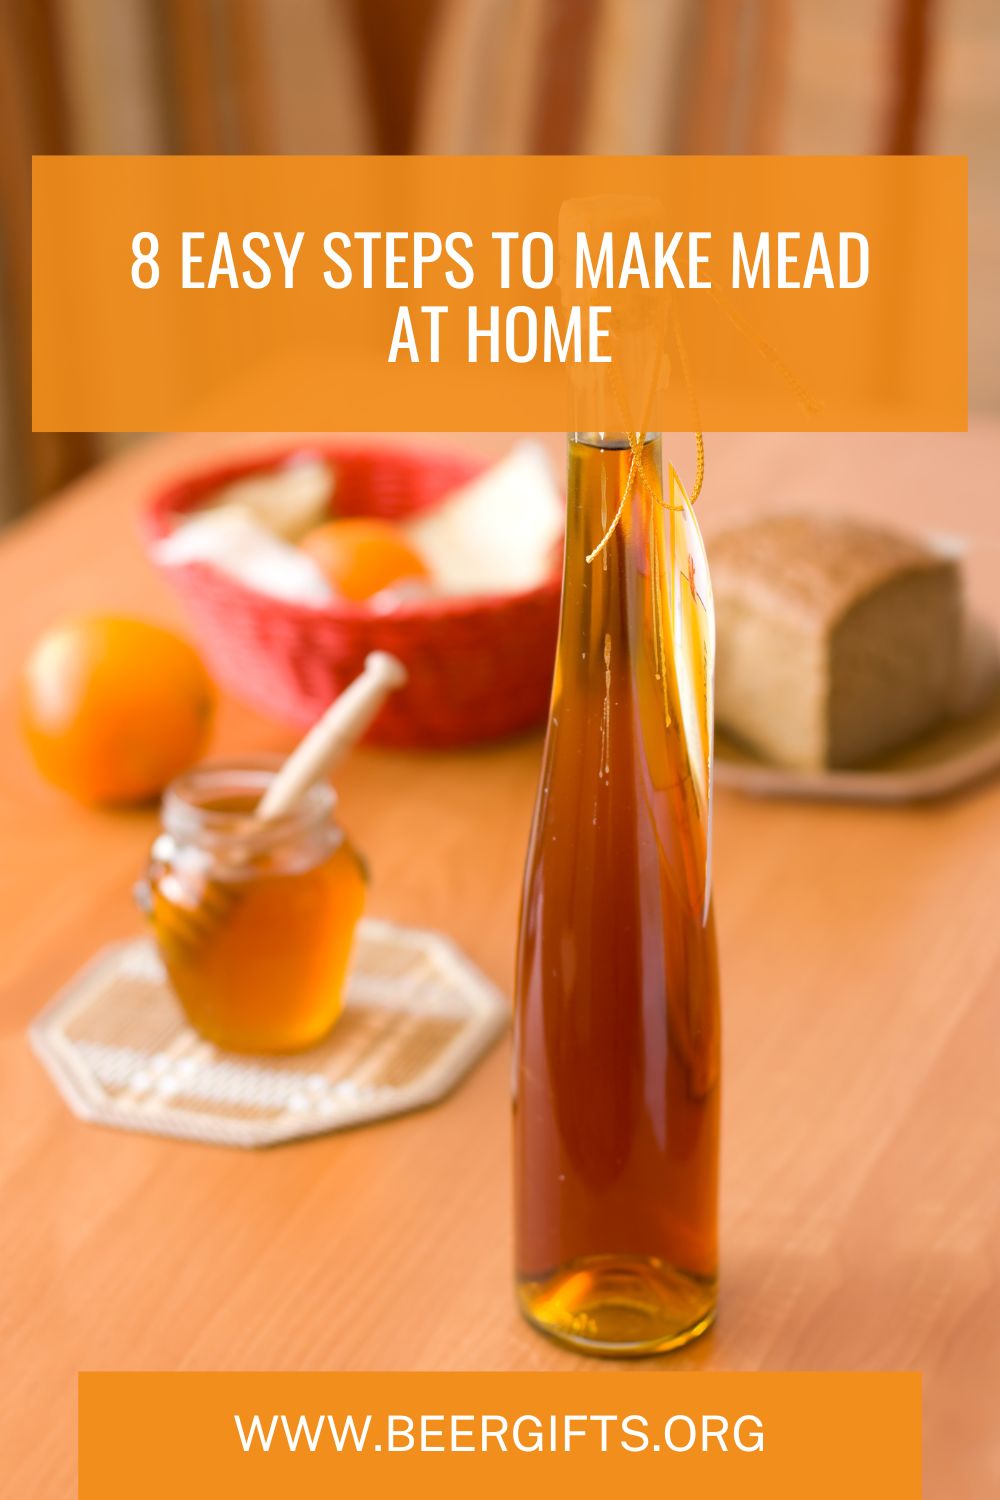 8 Easy Steps to Make Mead at Home8